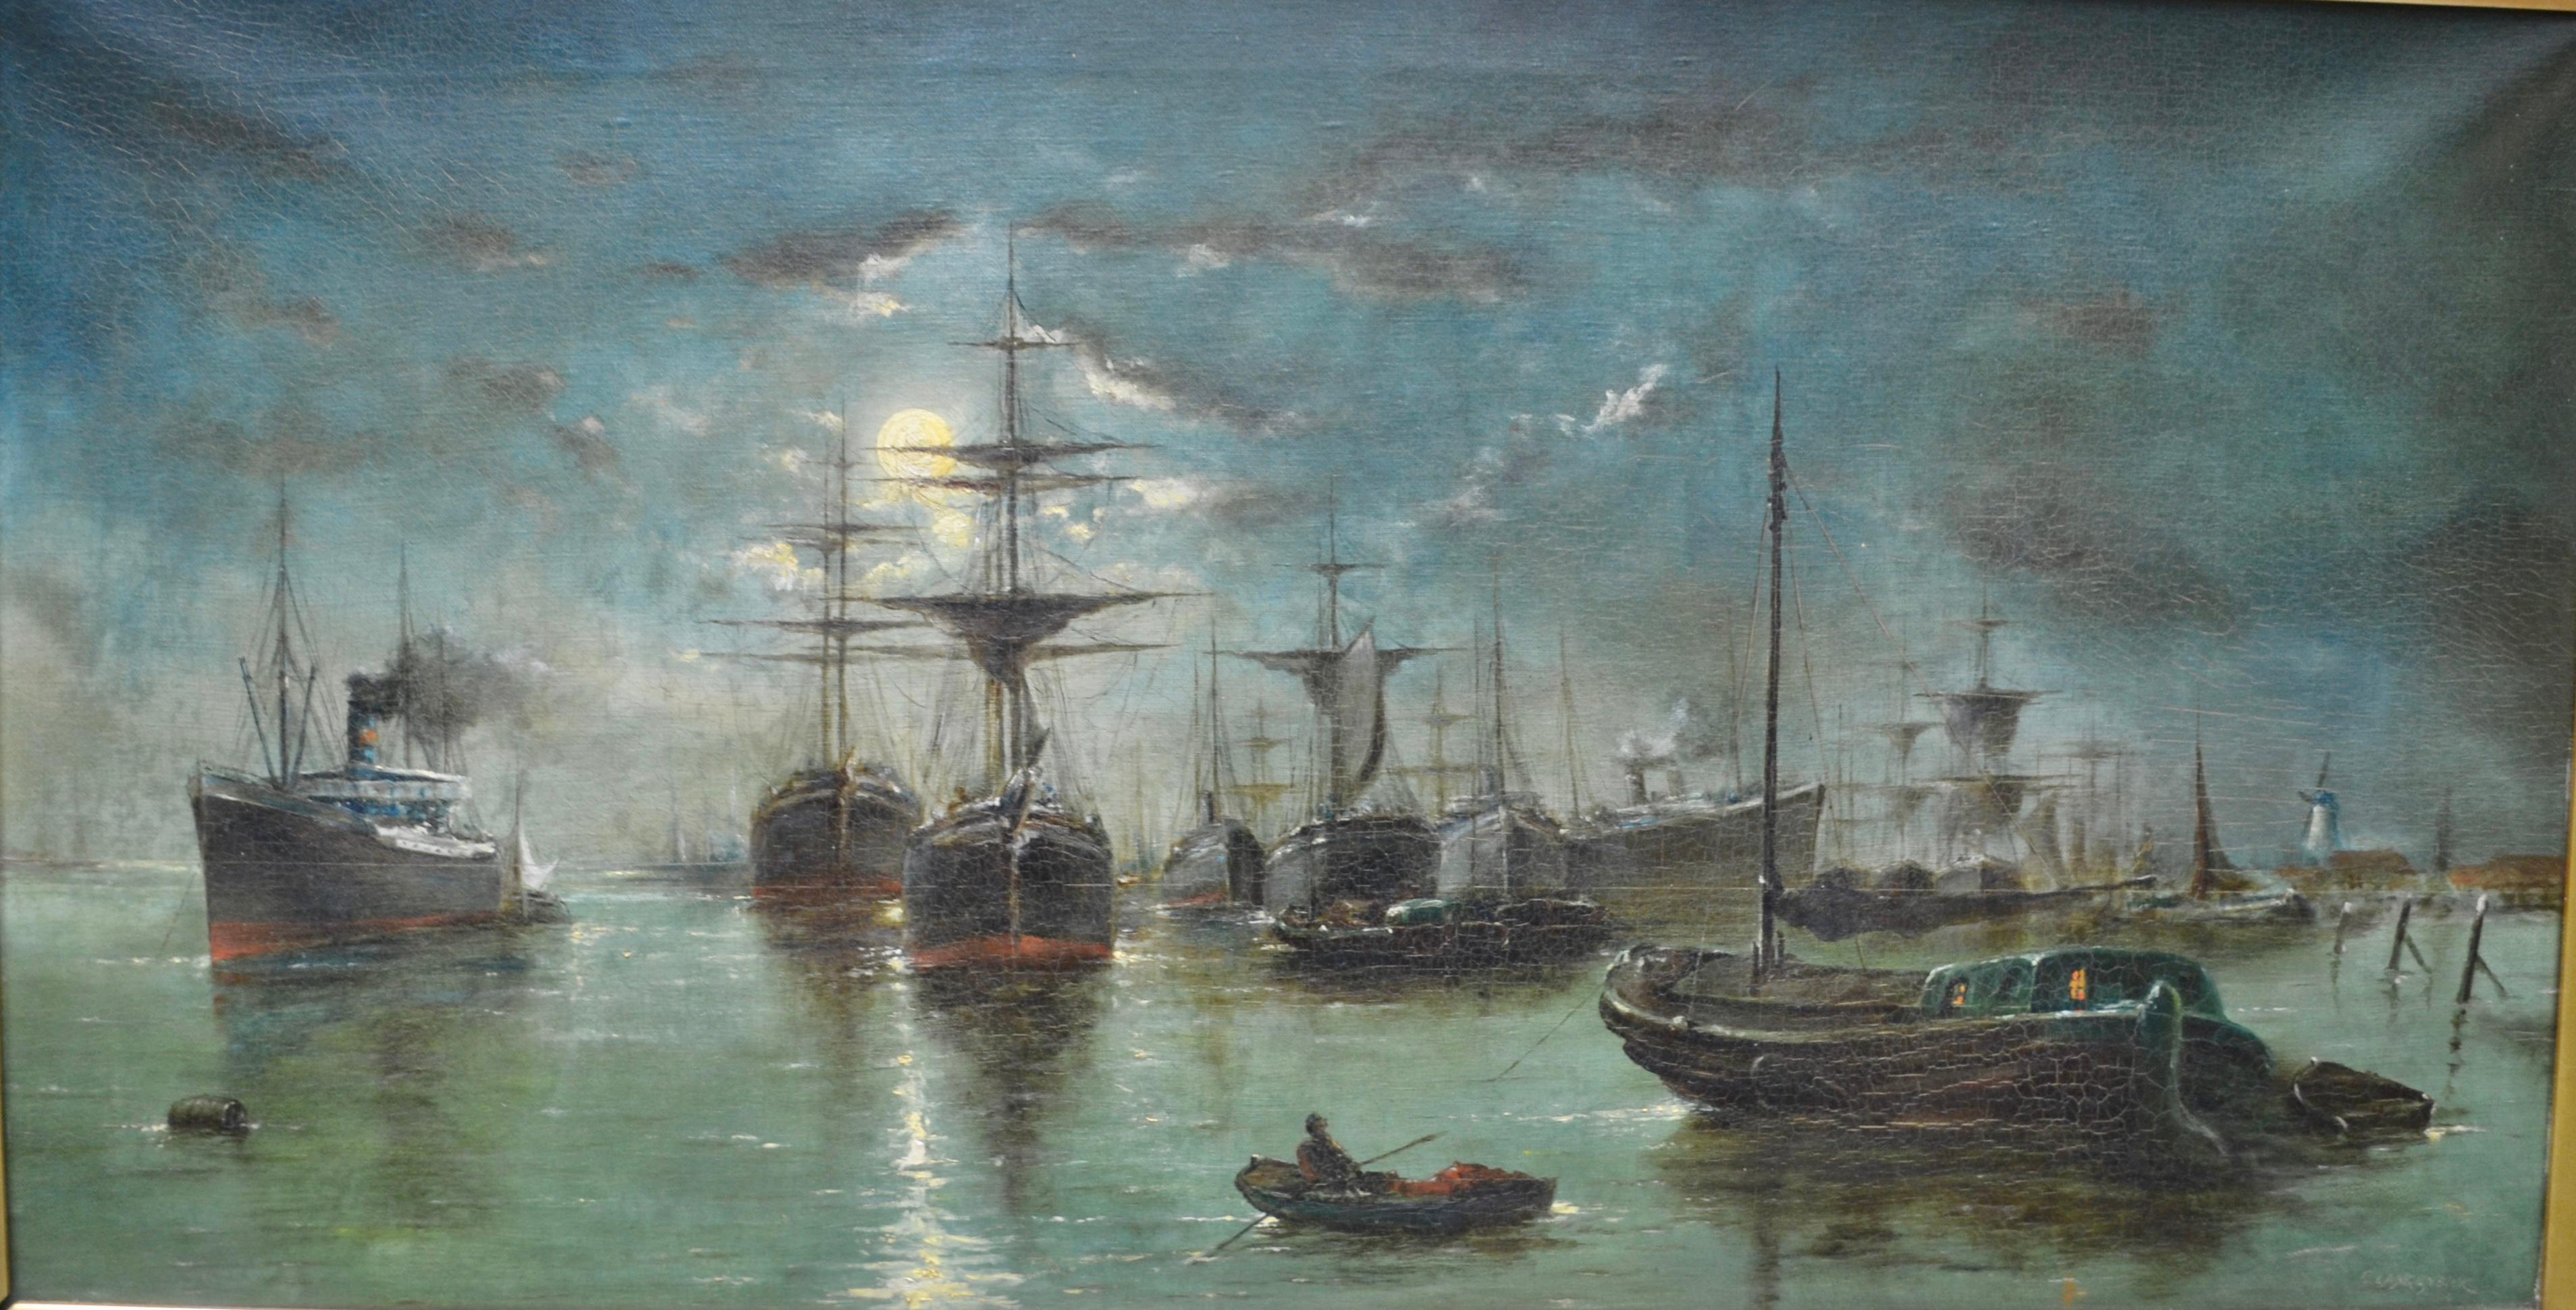 Belgian Classic Marine Painting Signed C. Langenbeck Dated 1906 For Sale